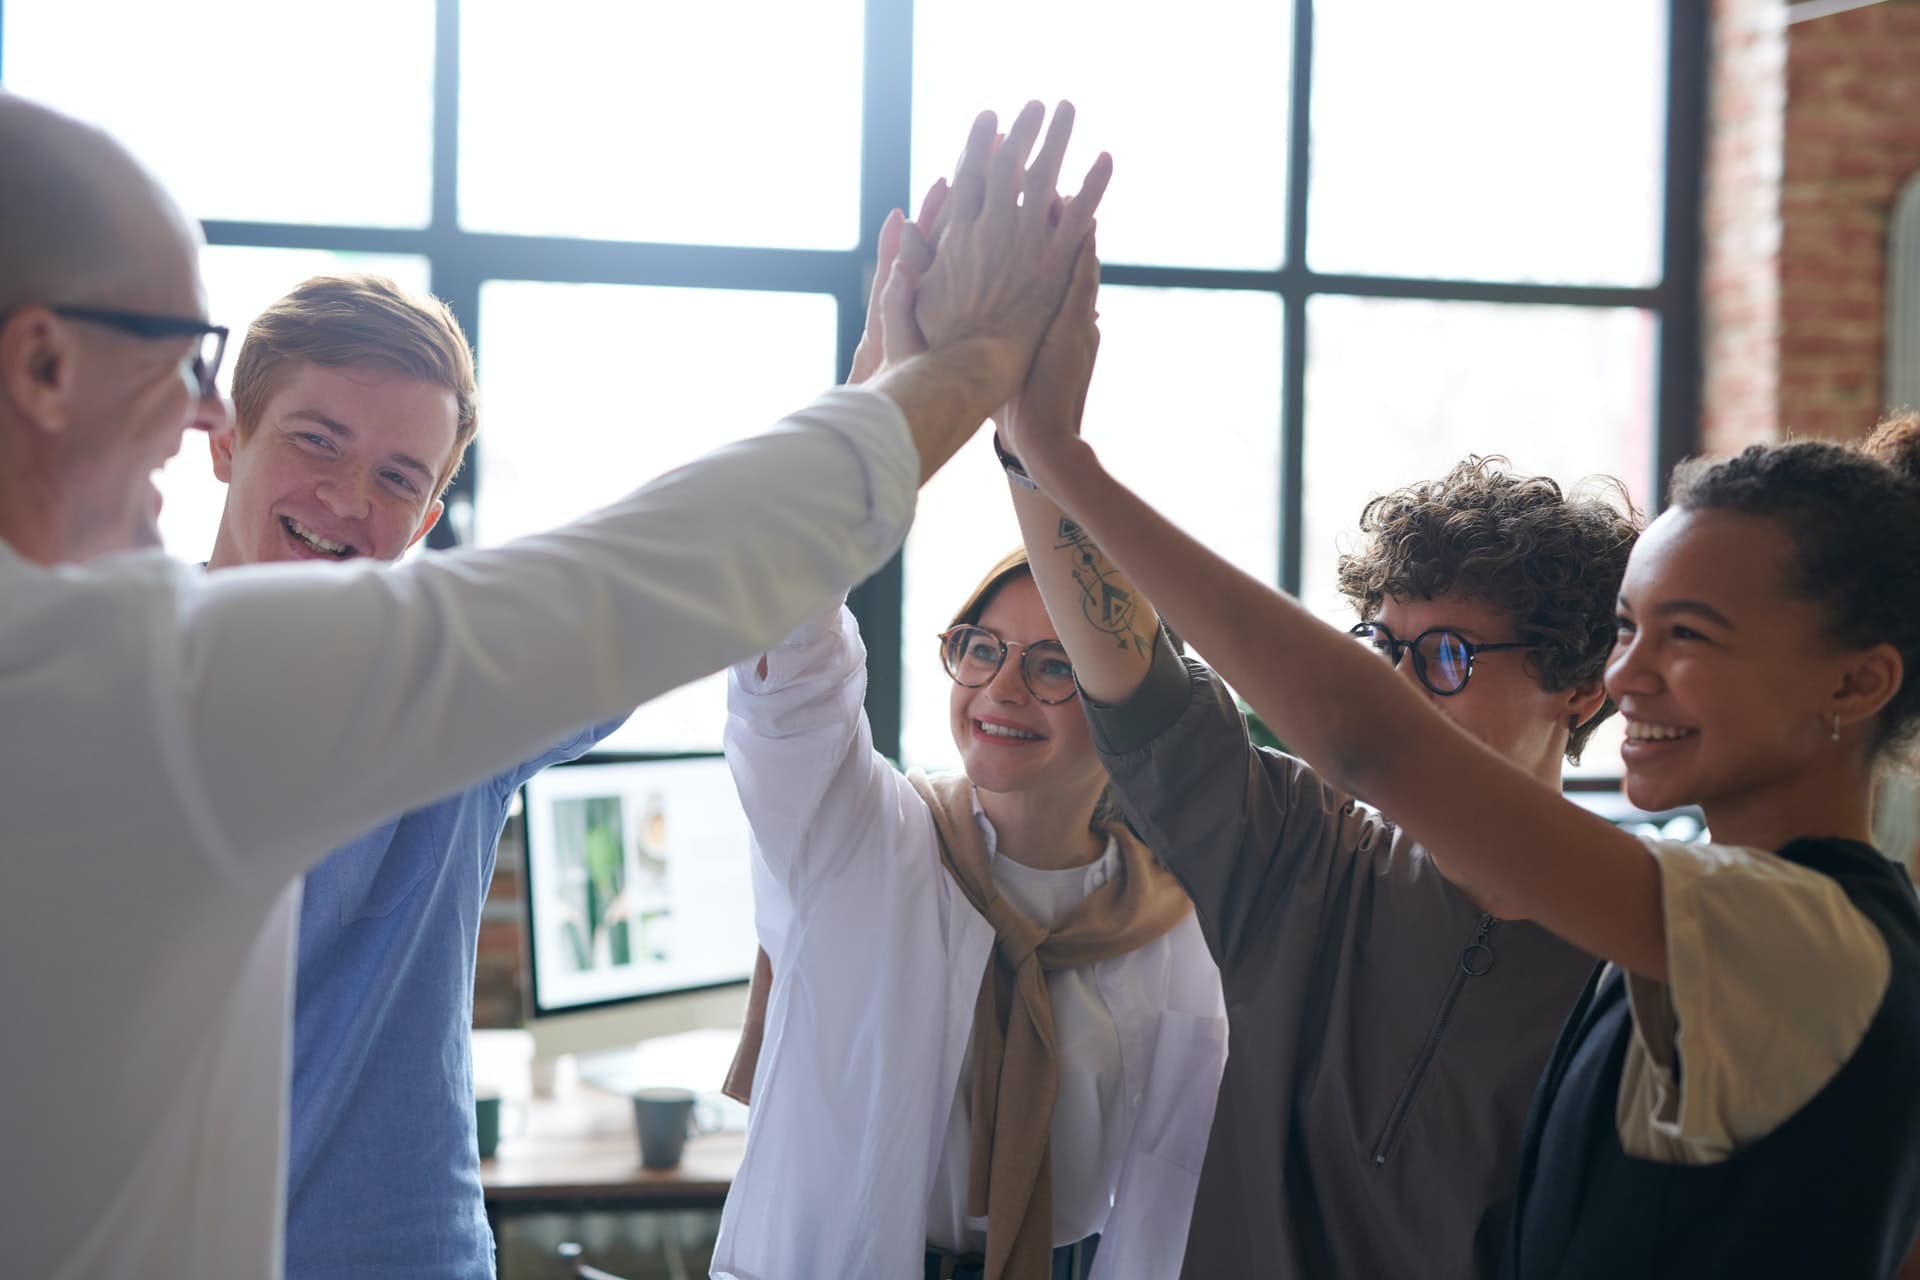 A group of people doing a group high five in an office.